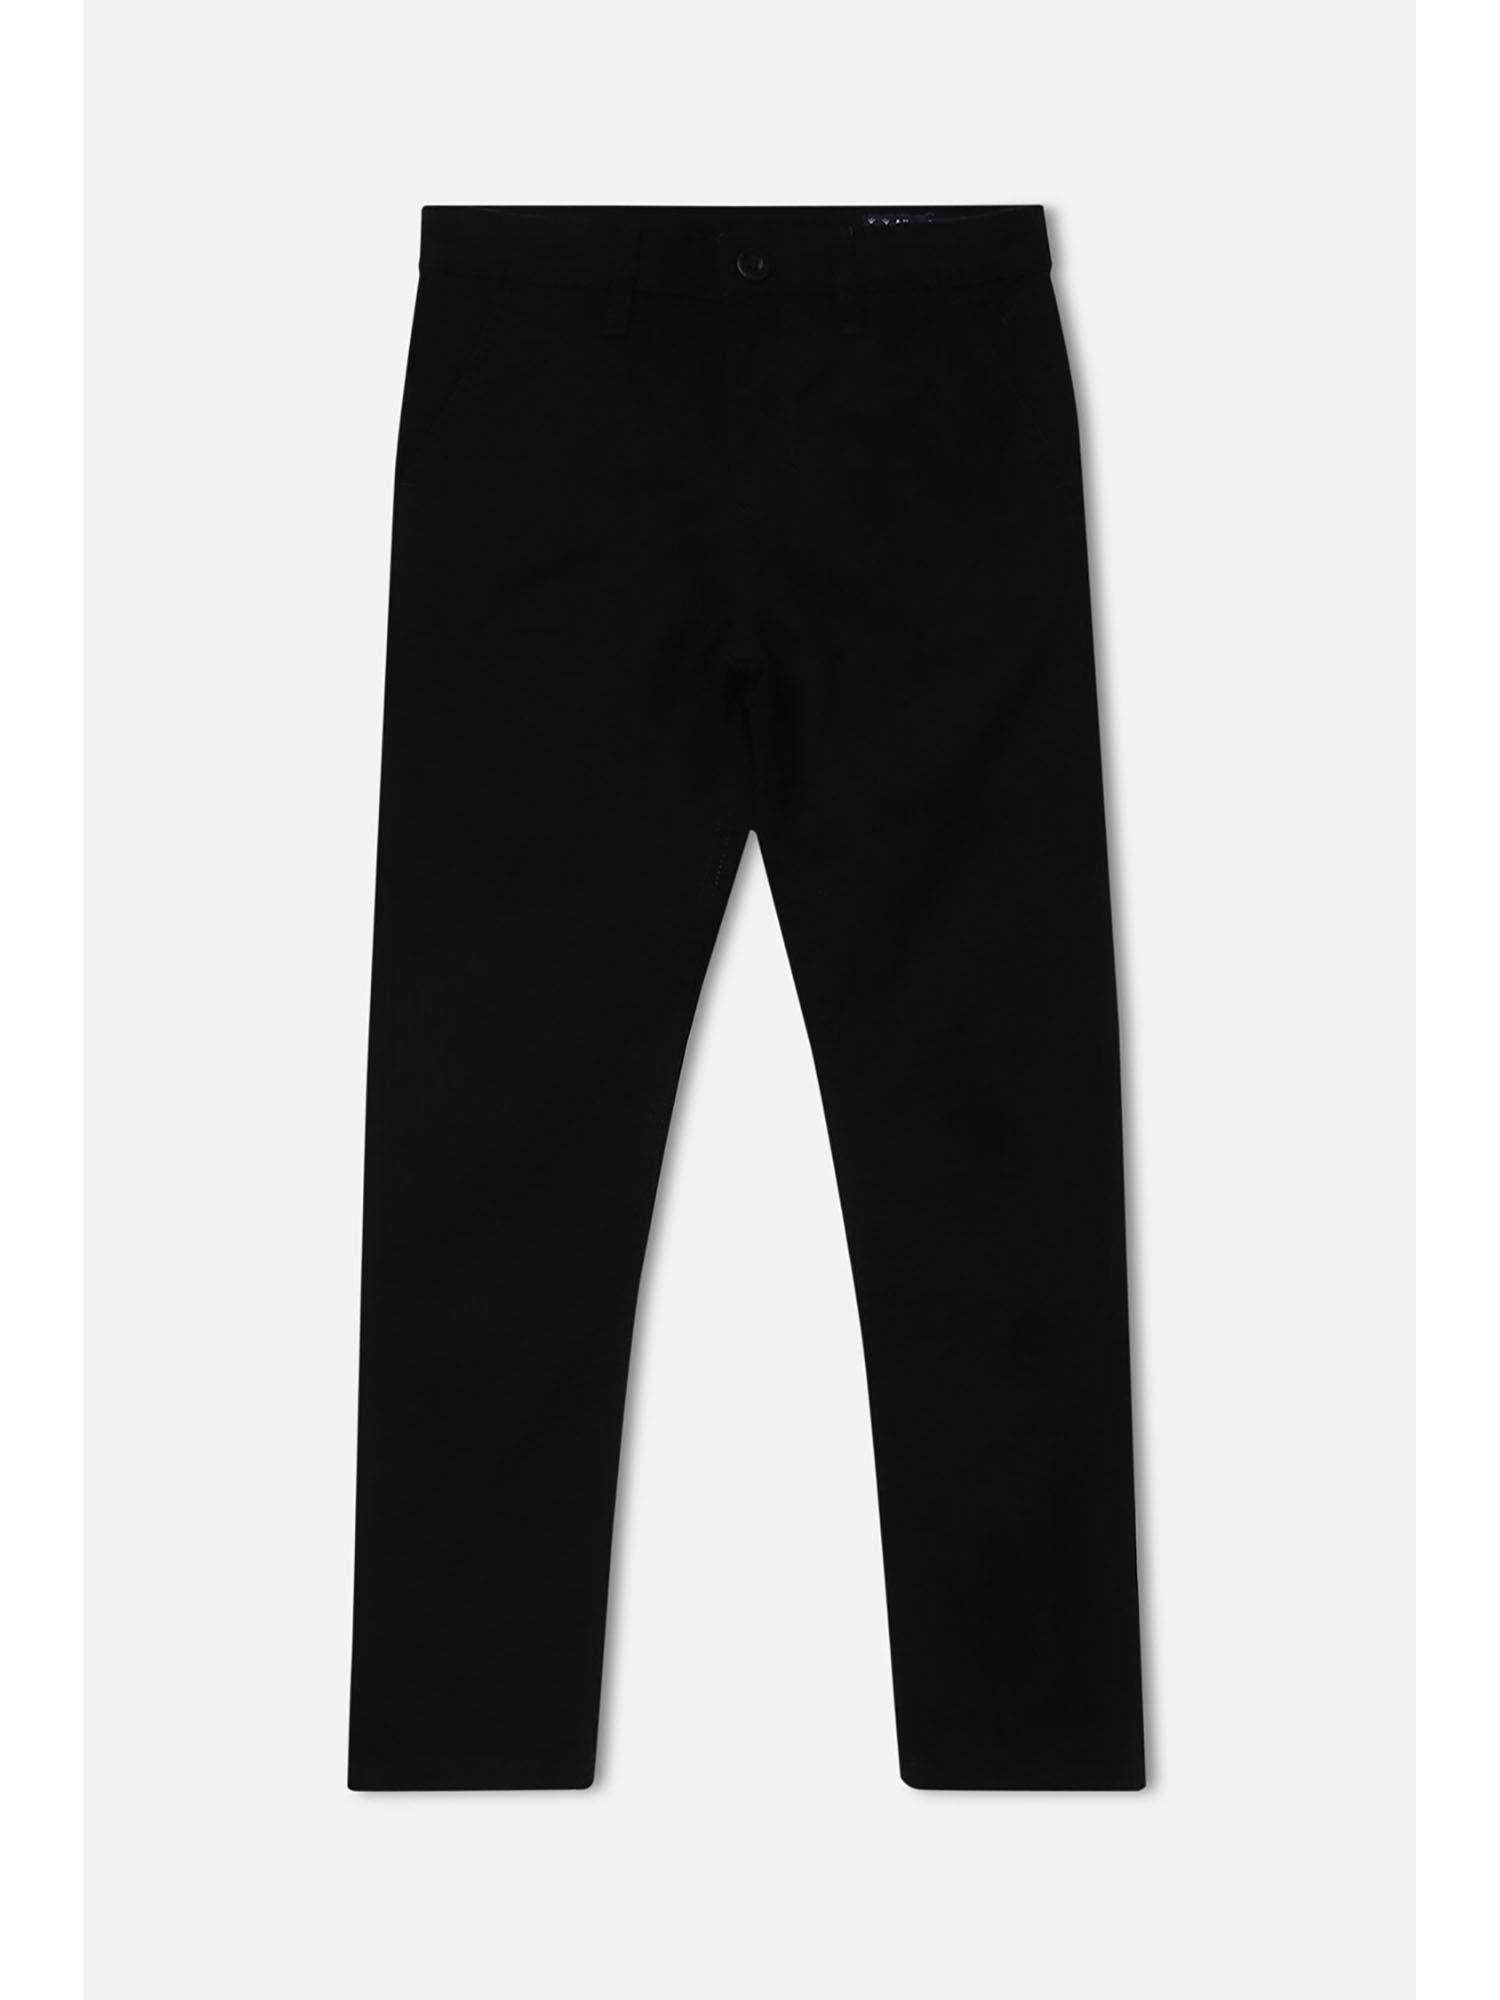 Boys Black Slim Fit Solid Trousers